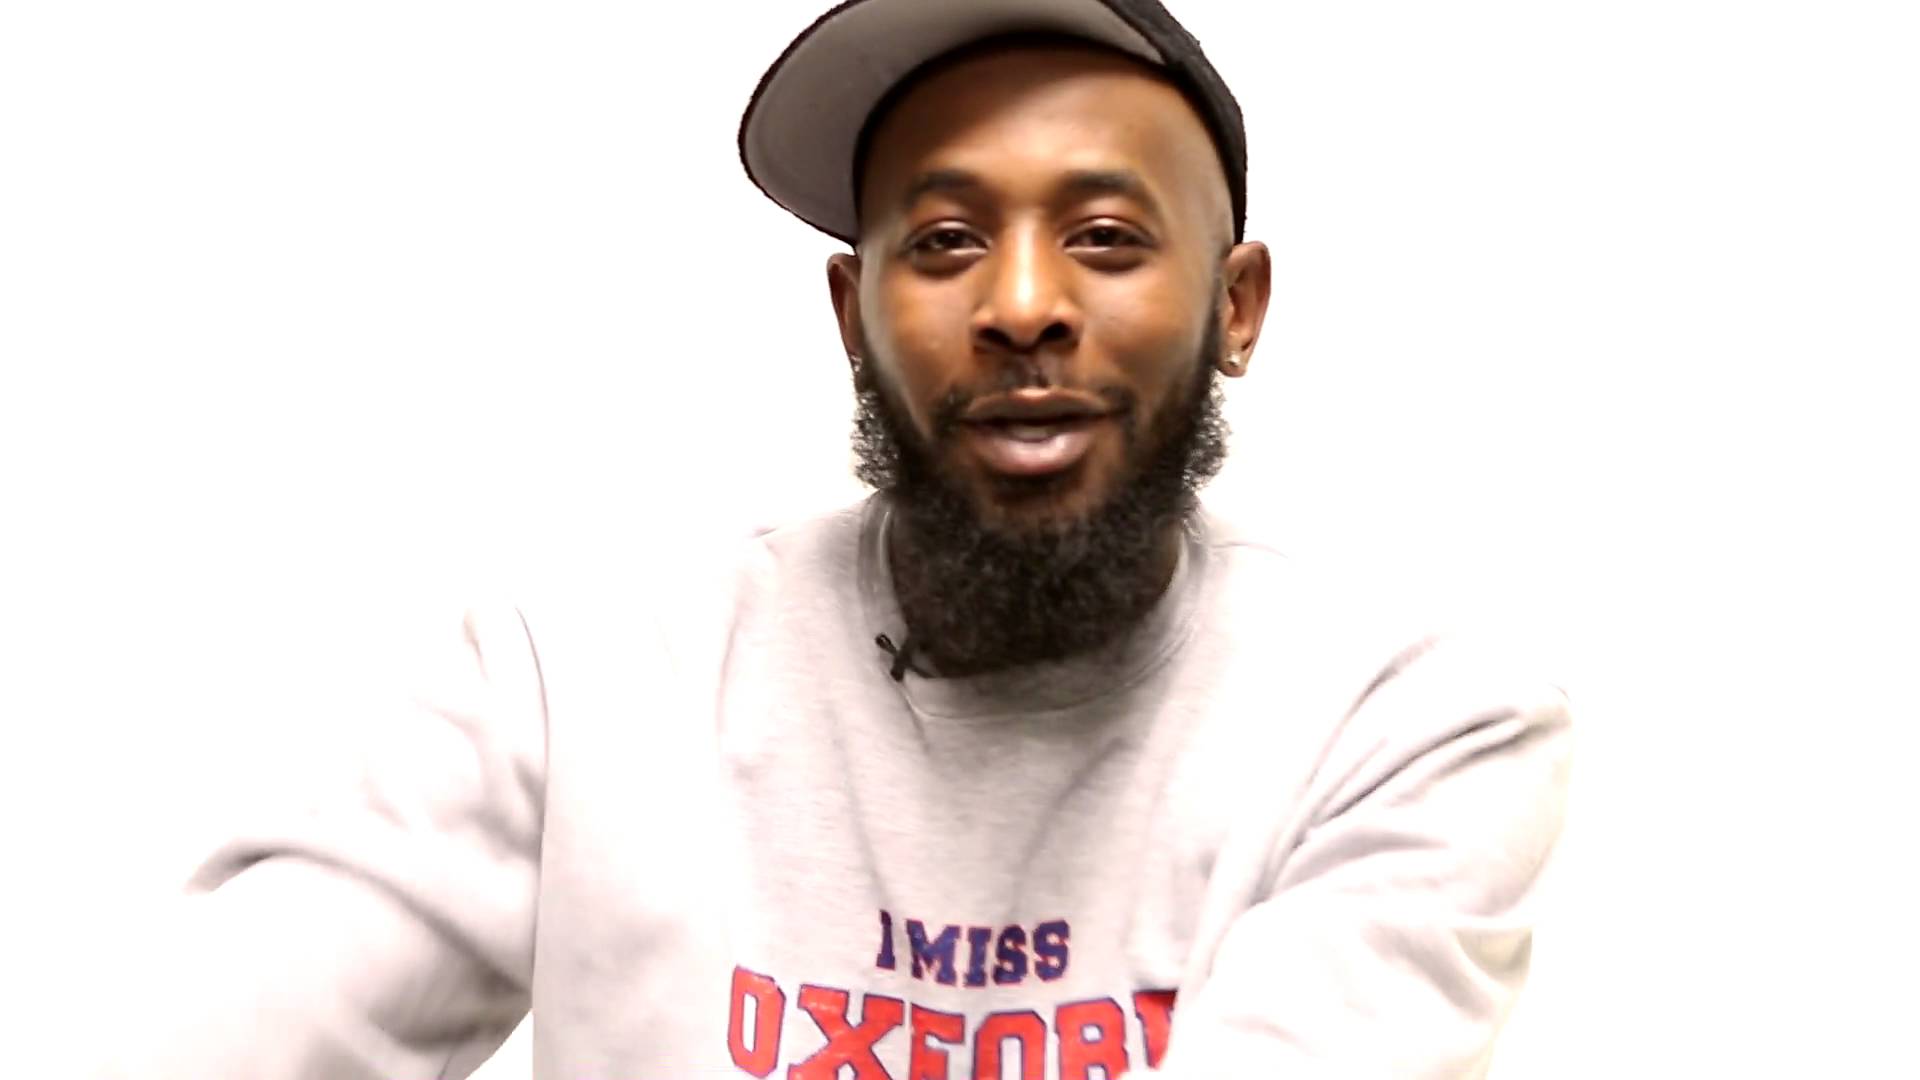 Karlous Miller Net Worth 2018 See How Much They Make & More.